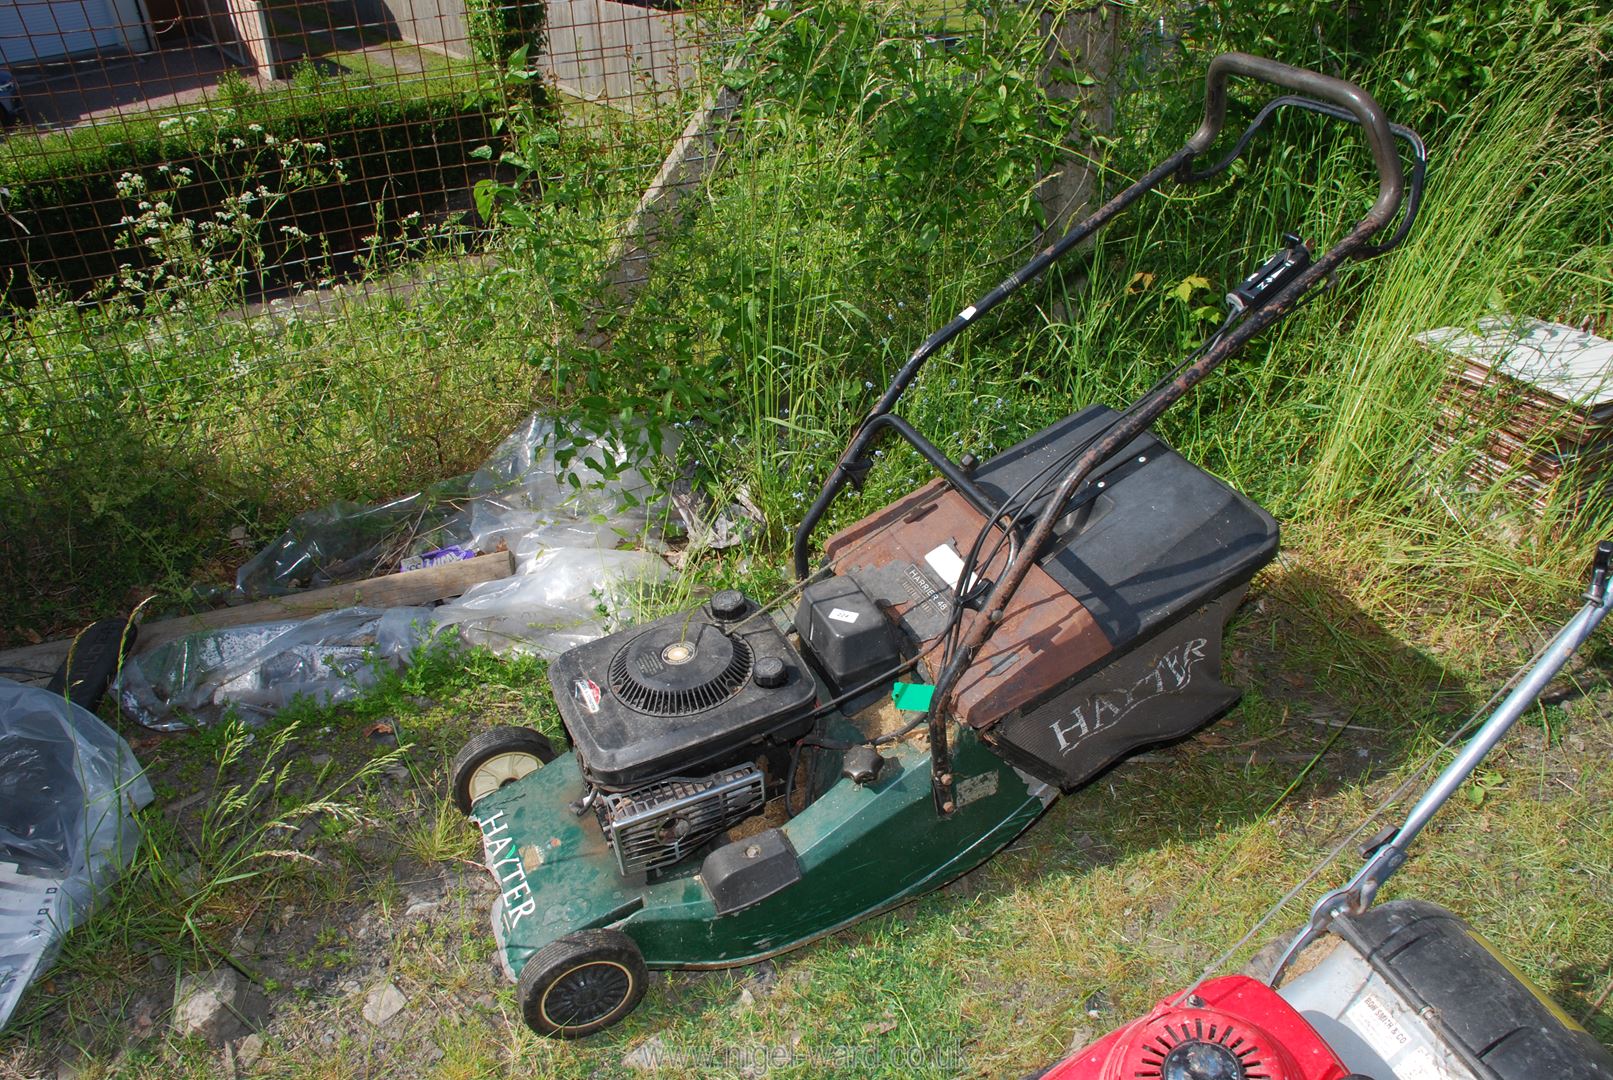 A Hayter Harrier 48 mower with grass box (starts with pull cord - in running order).